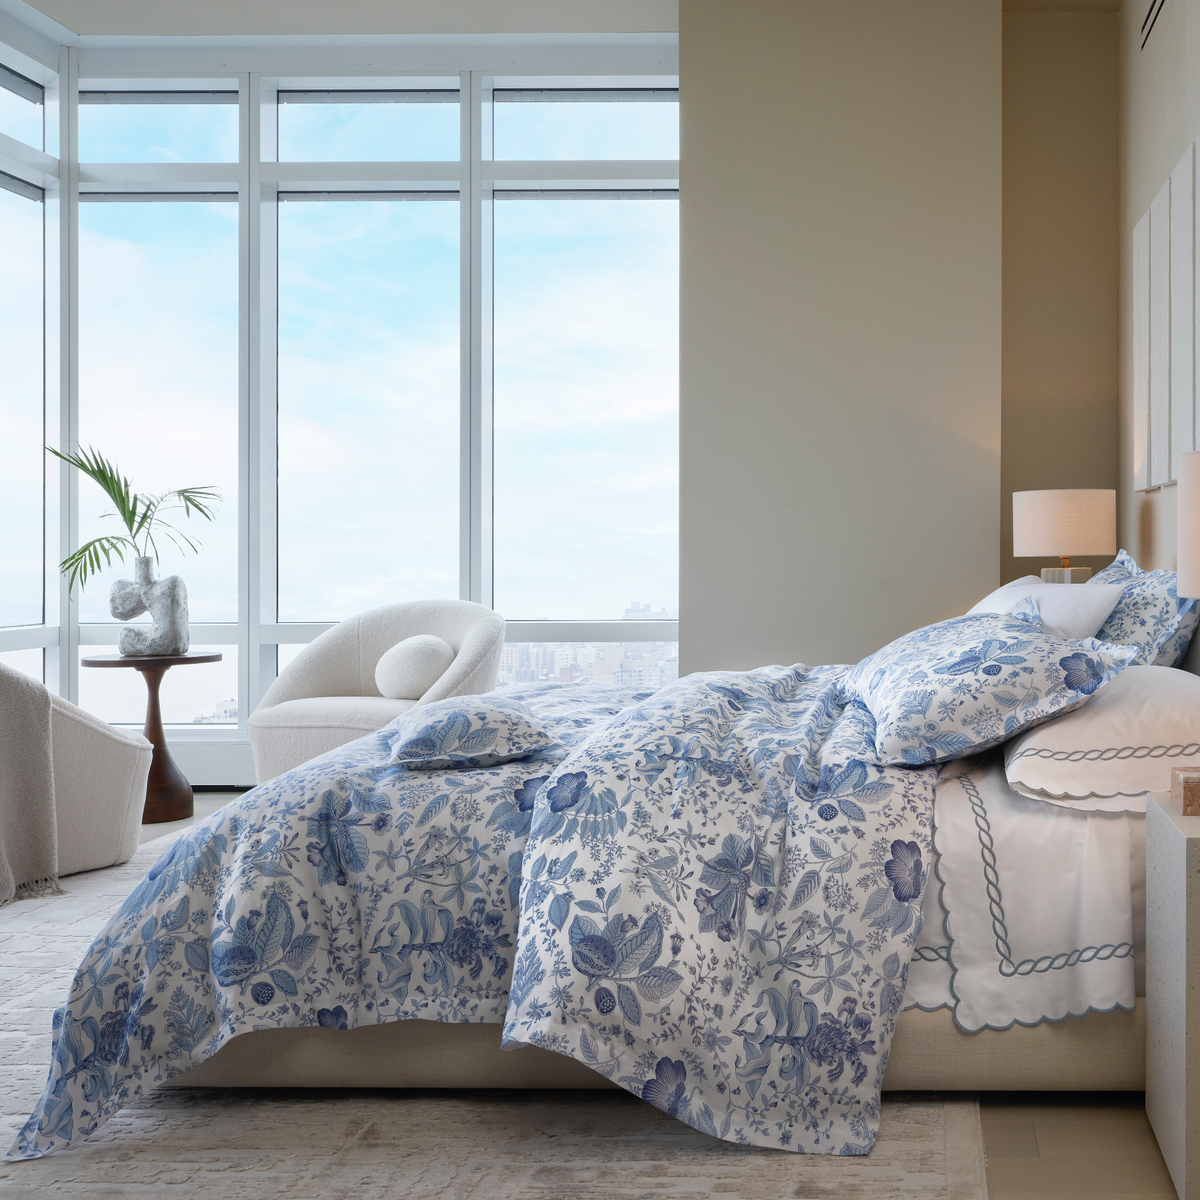 Lifestyle Picture of Sideview Full Bed of Matouk Schumacher Pomegranate Linen Bedding in Porcelain Blue Color